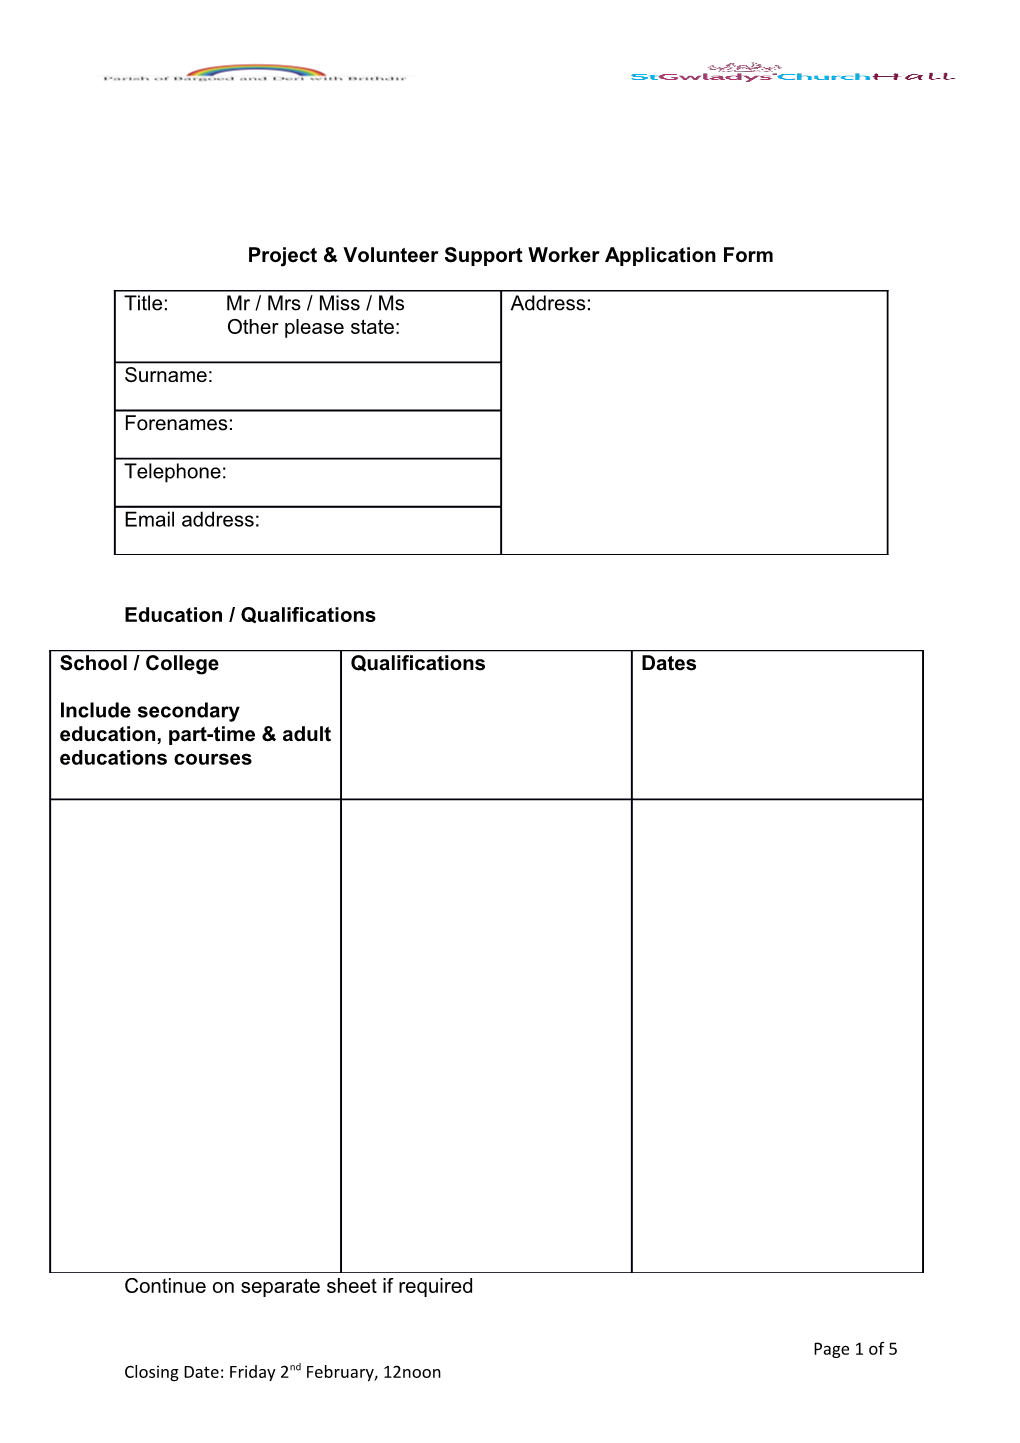 Project & Volunteer Support Worker Application Form